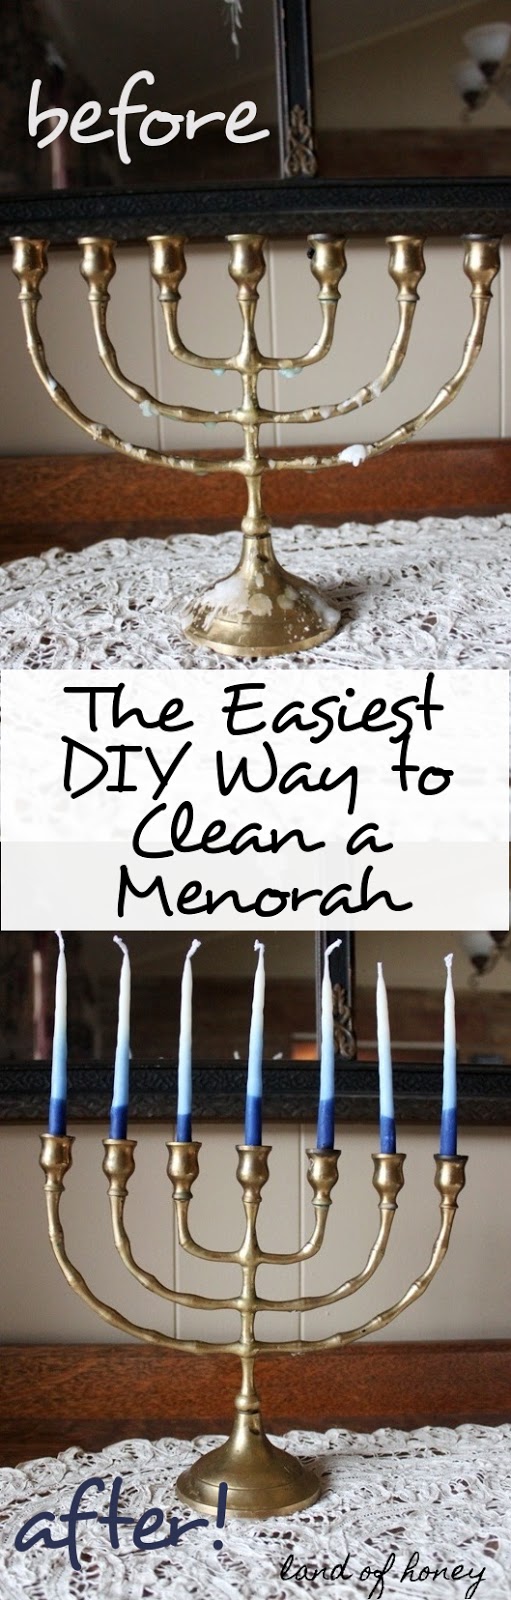 Super simple way to clean your menorah! | Land of Honey